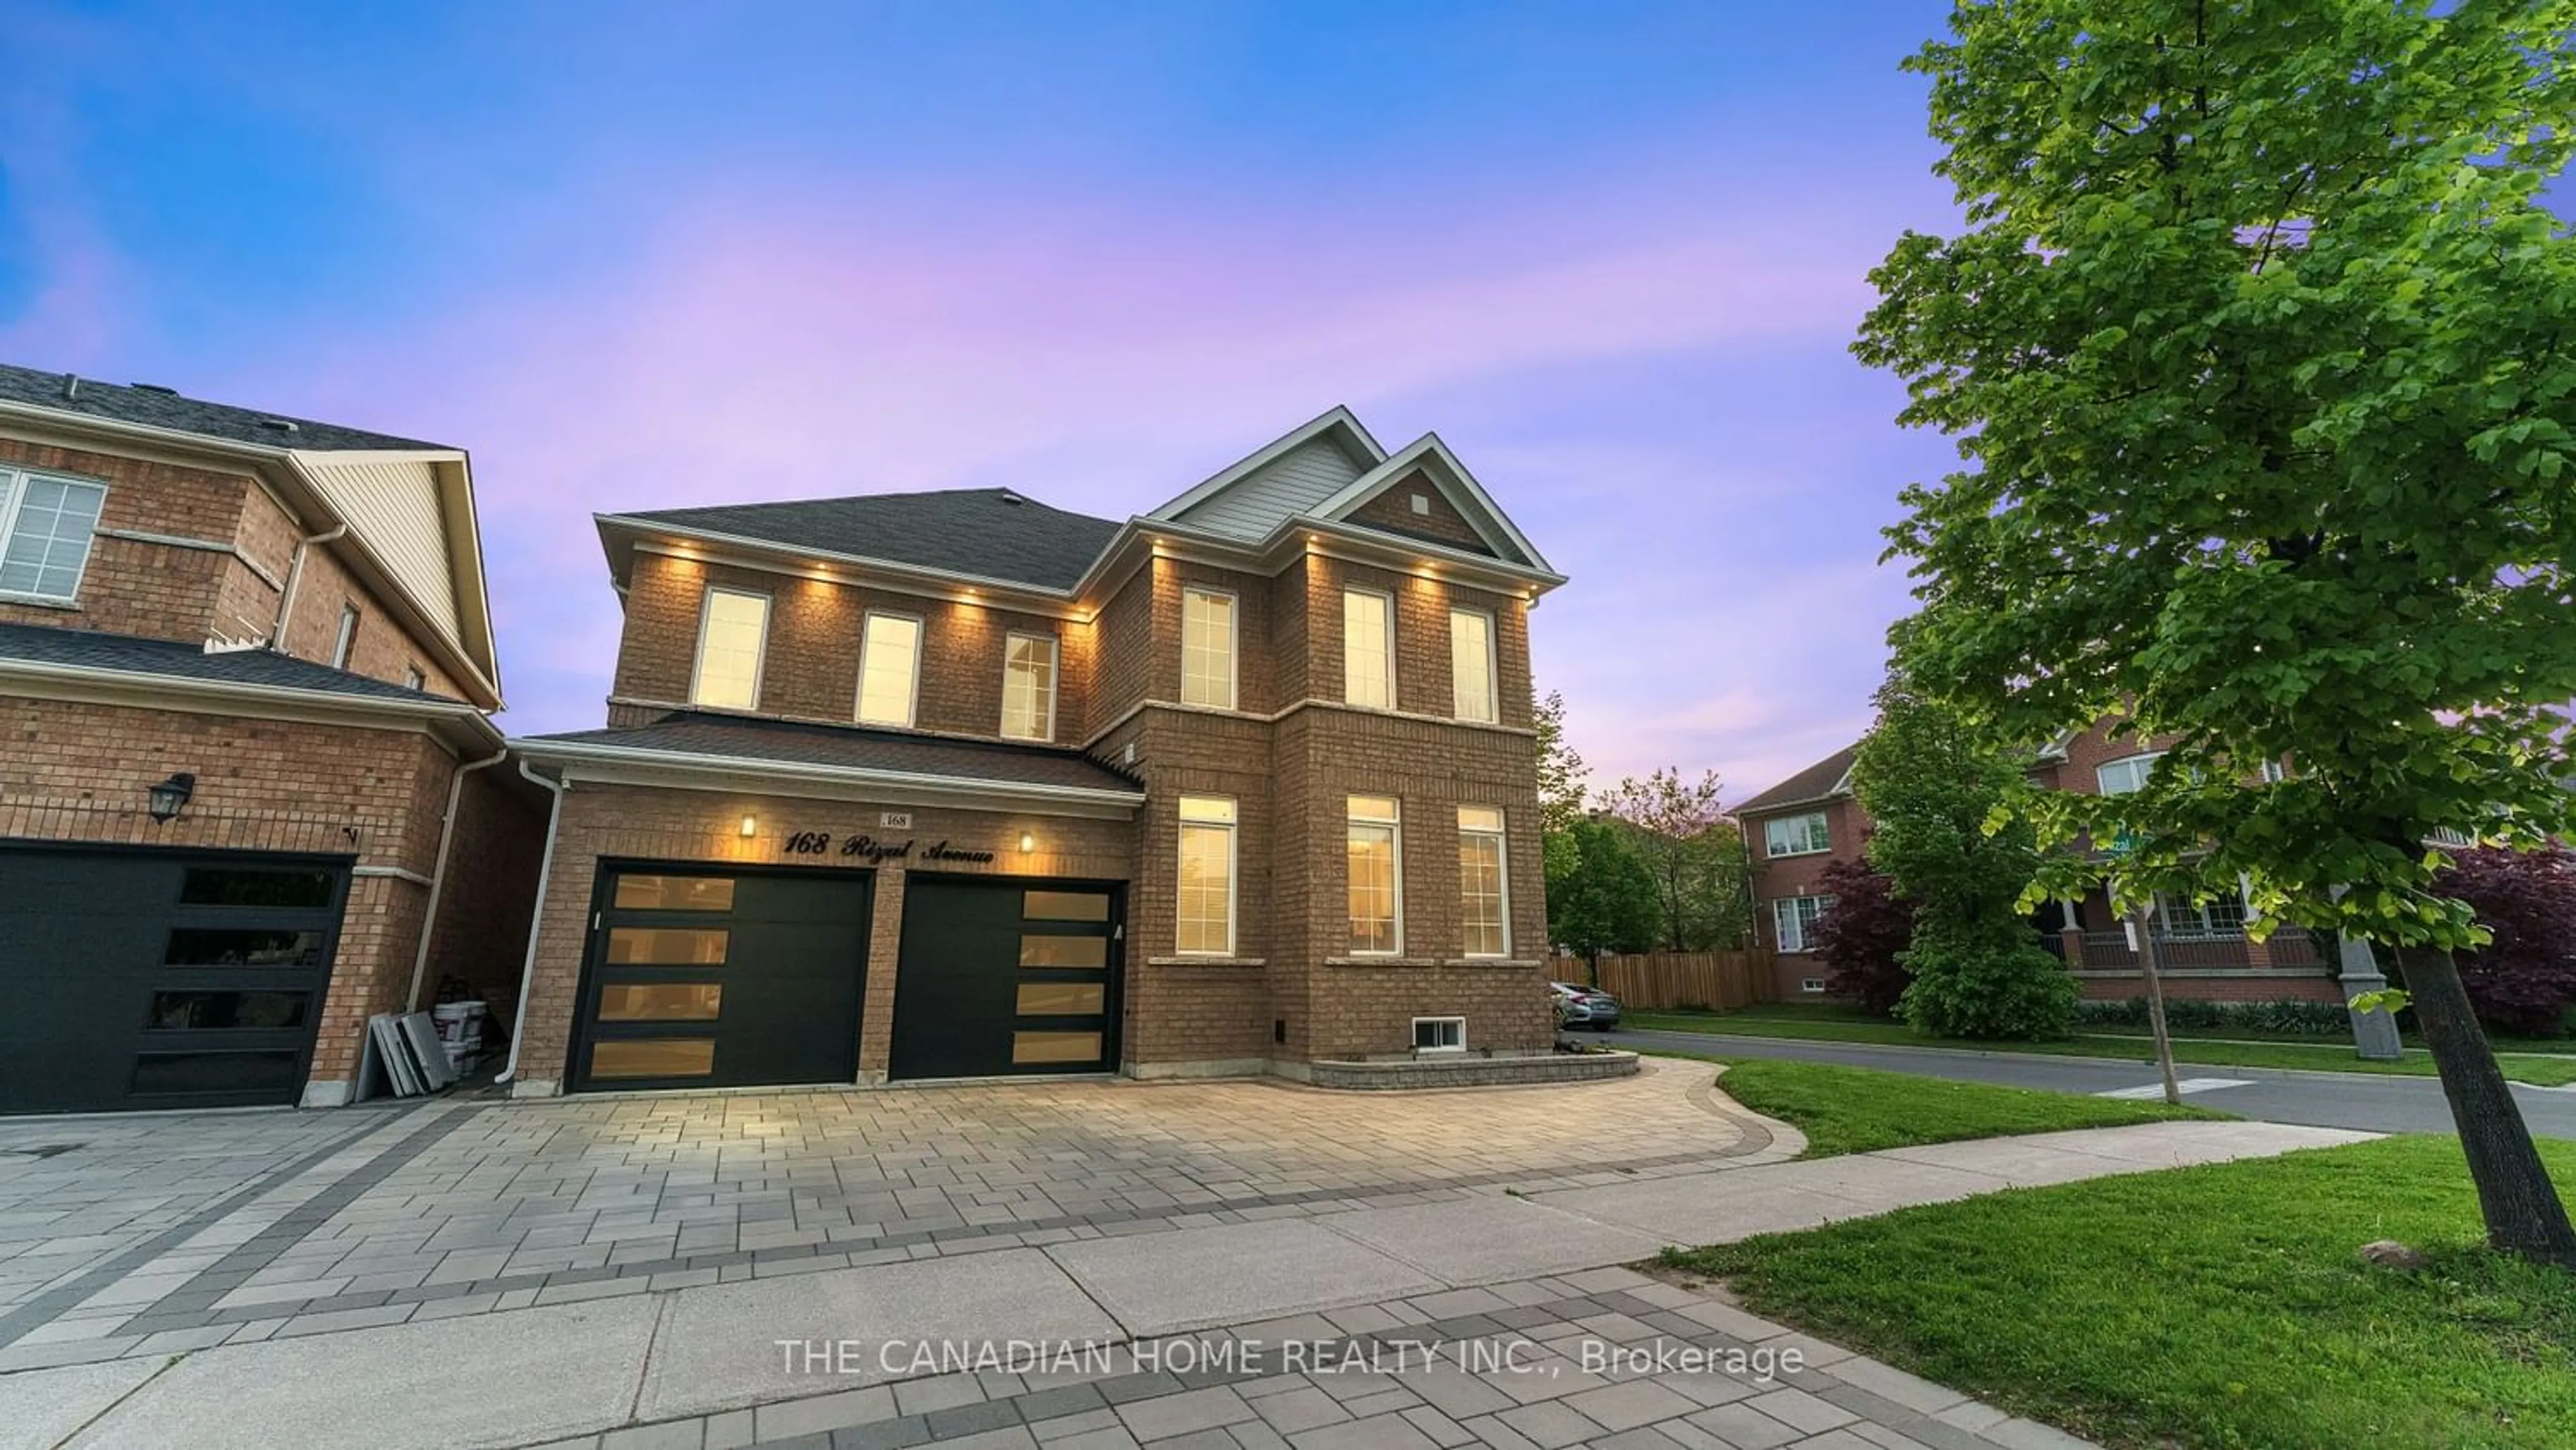 Home with brick exterior material for 168 Rizal Ave, Markham Ontario L6B 0E7